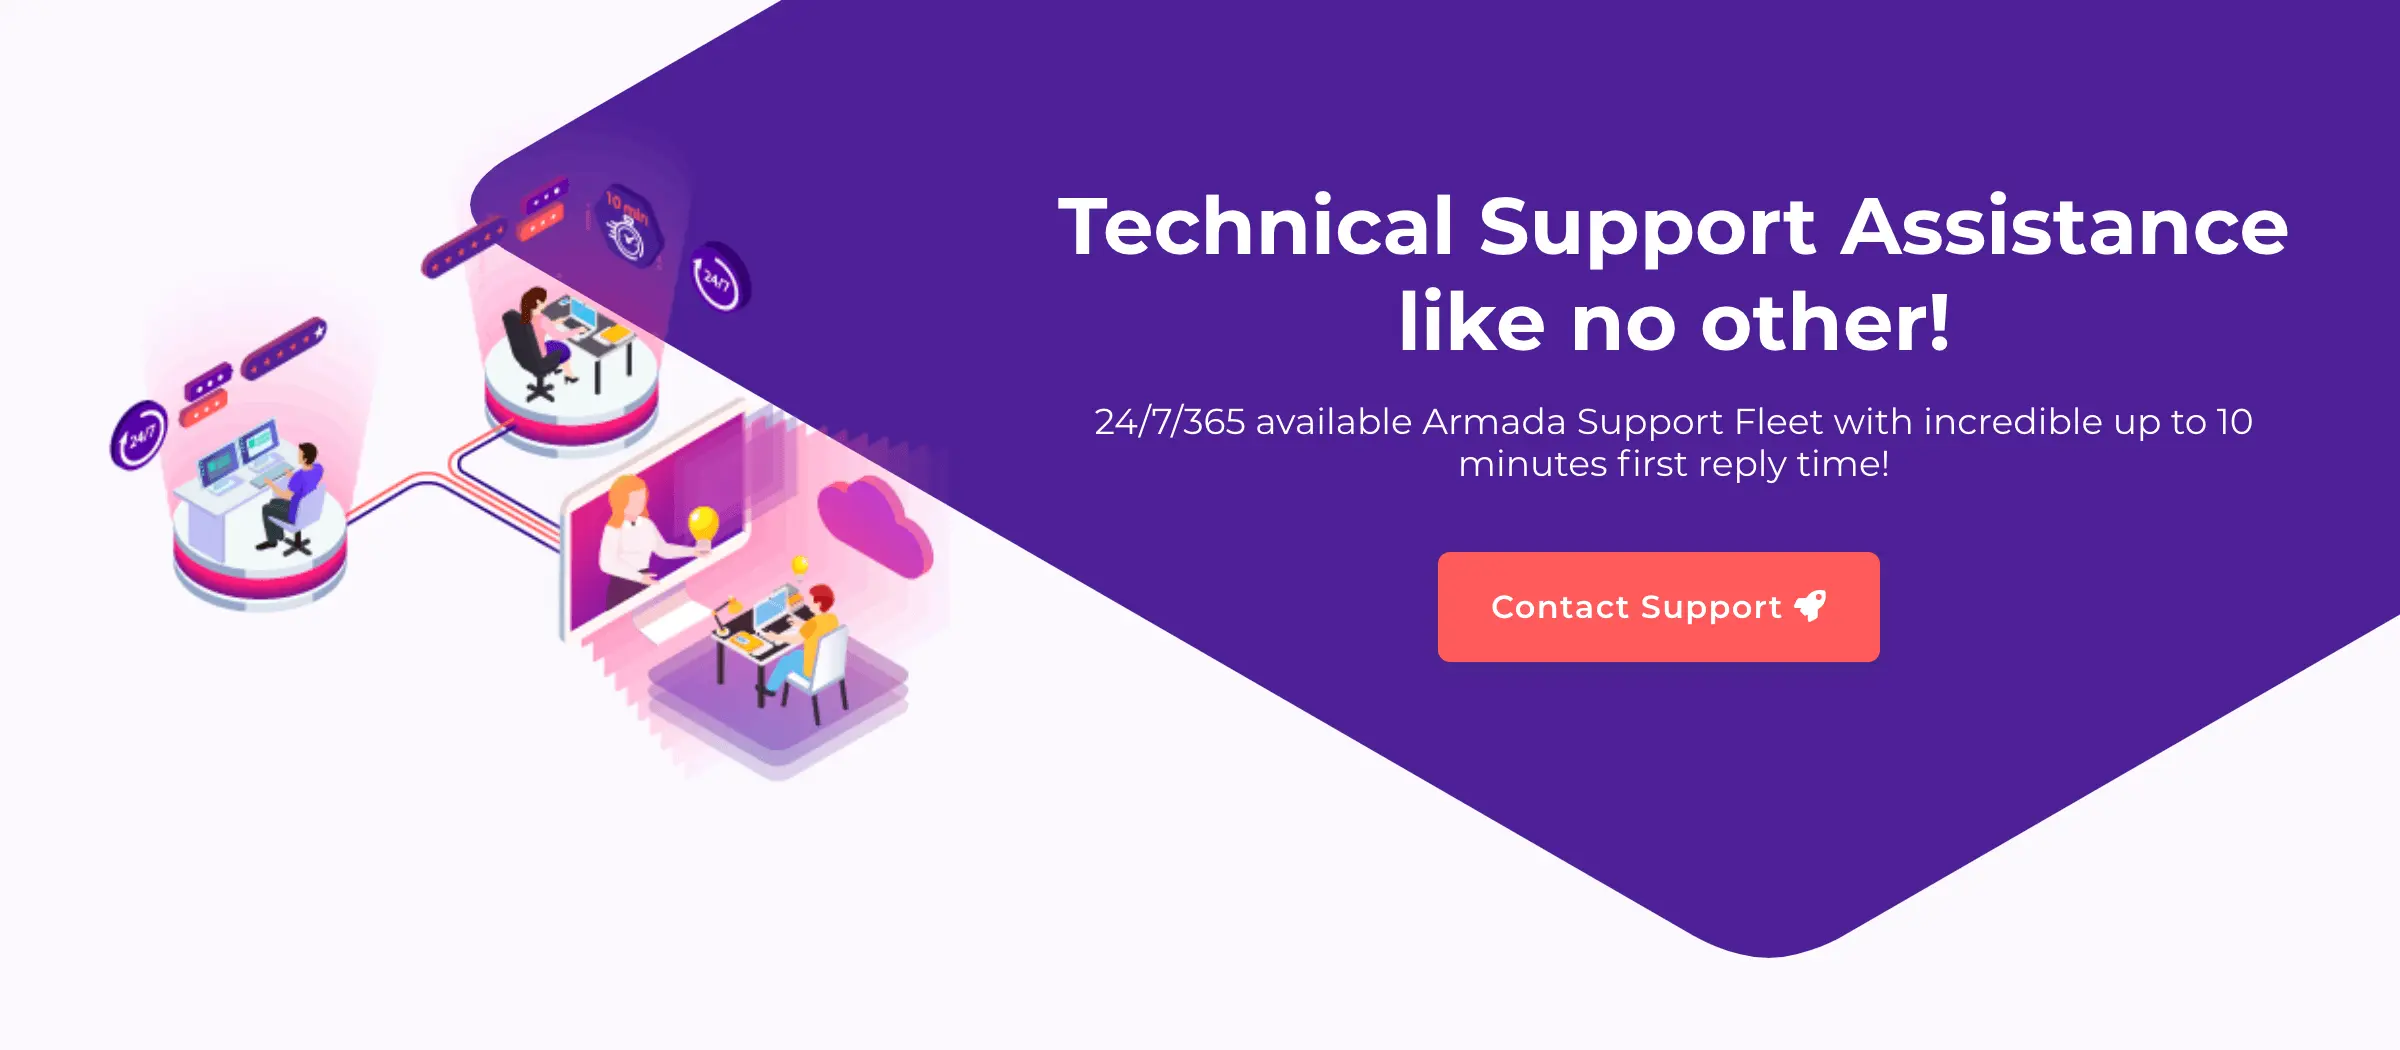 HostArmada Review Technical Support